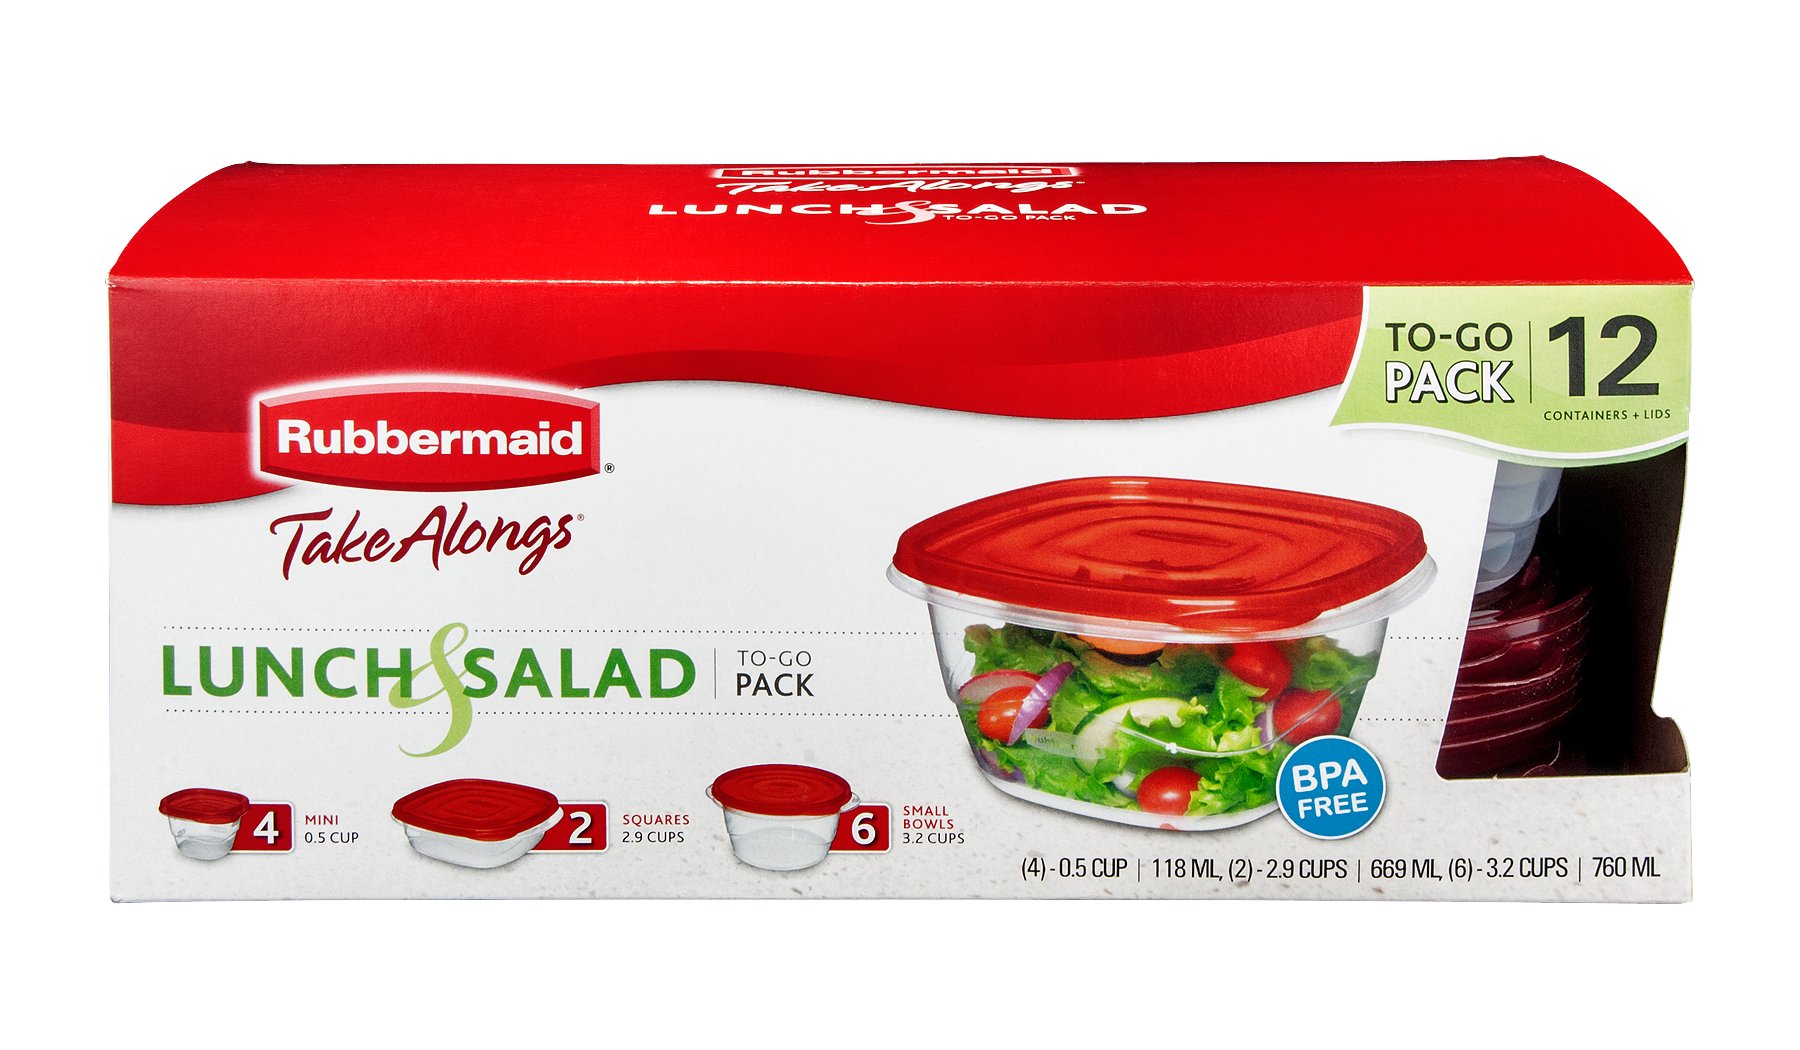 Rubbermaid TakeAlongs Containers + Lids, Small Bowls - 2 containers + lids